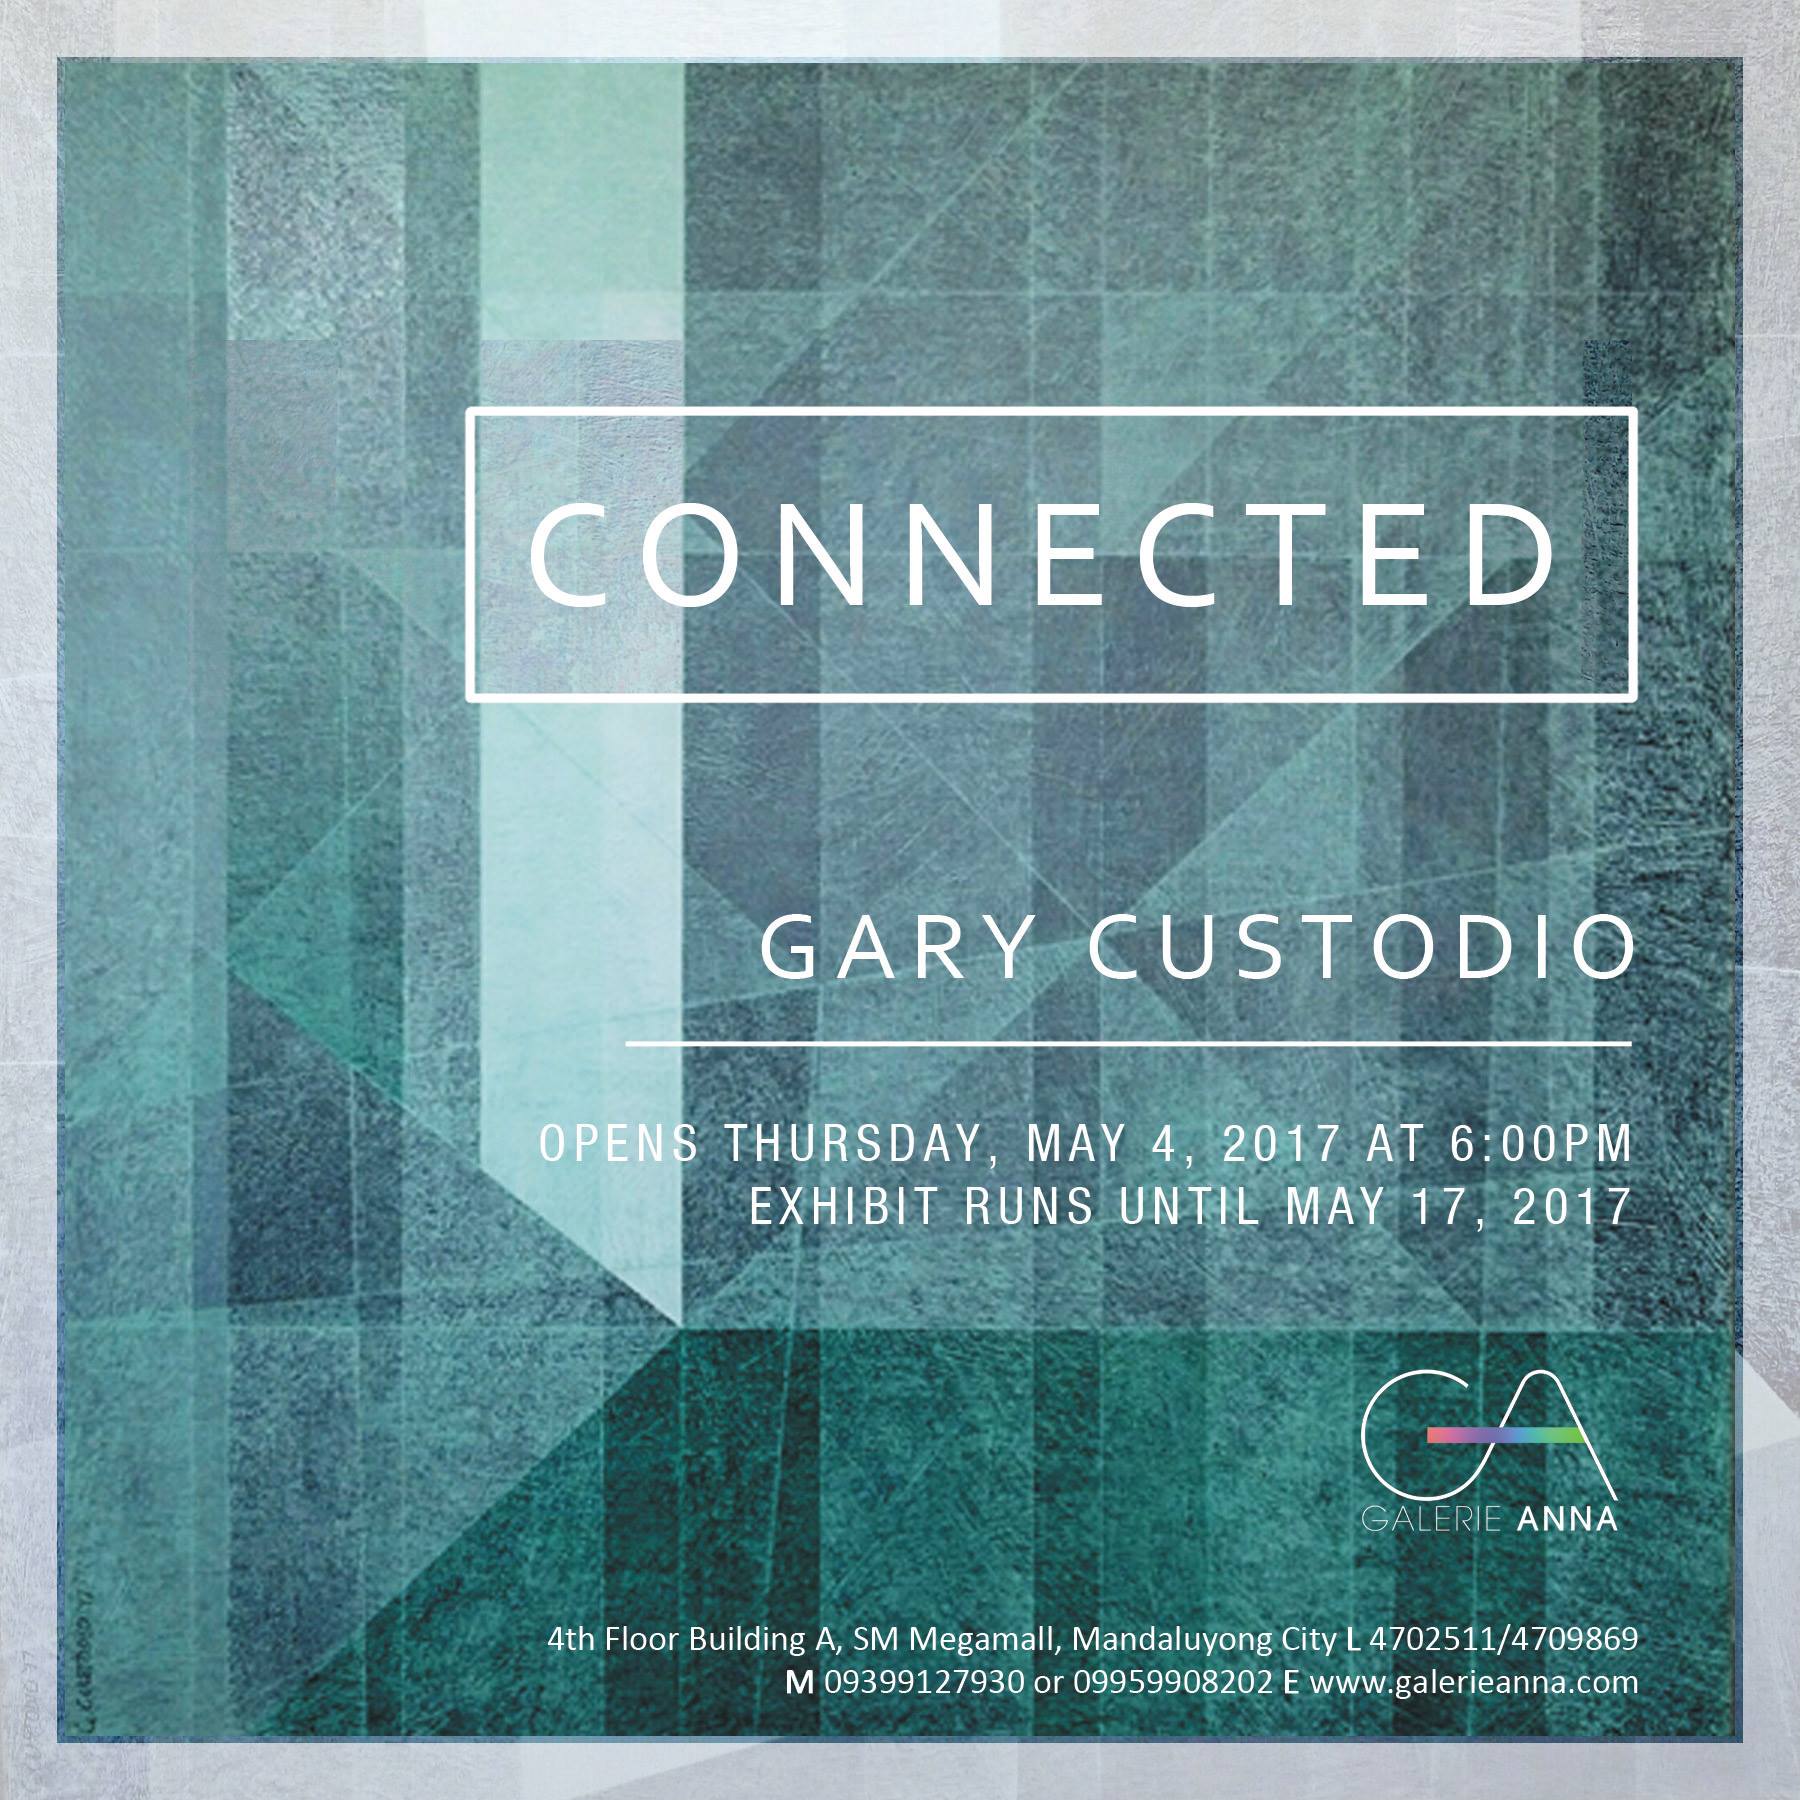 Galerie Anna Page Liked · April 27 · "CONNECTED" by Gary Custodio Opens Thursday, May 4, 2017 at 6:00pm Exhibit runs until May 17, 2017 #GalerieAnna 4th Flr. Bldg. A SM Megamall, Mandaluyong City #backtobackshow #ArtExhibit #GaryCustodio — with Gary Custodio.